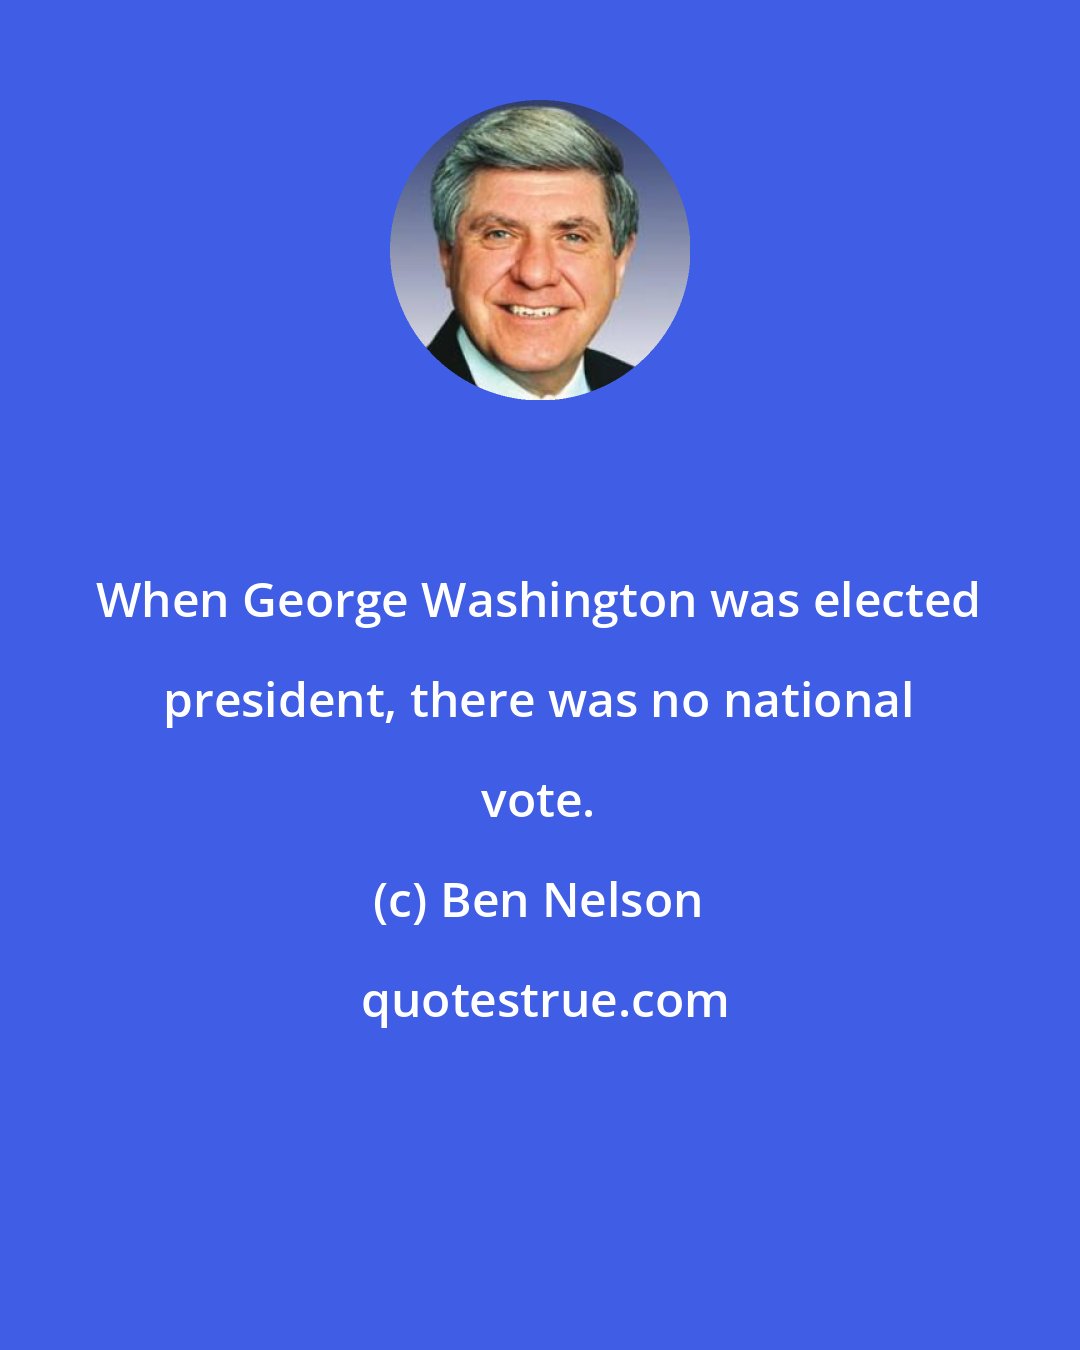 Ben Nelson: When George Washington was elected president, there was no national vote.